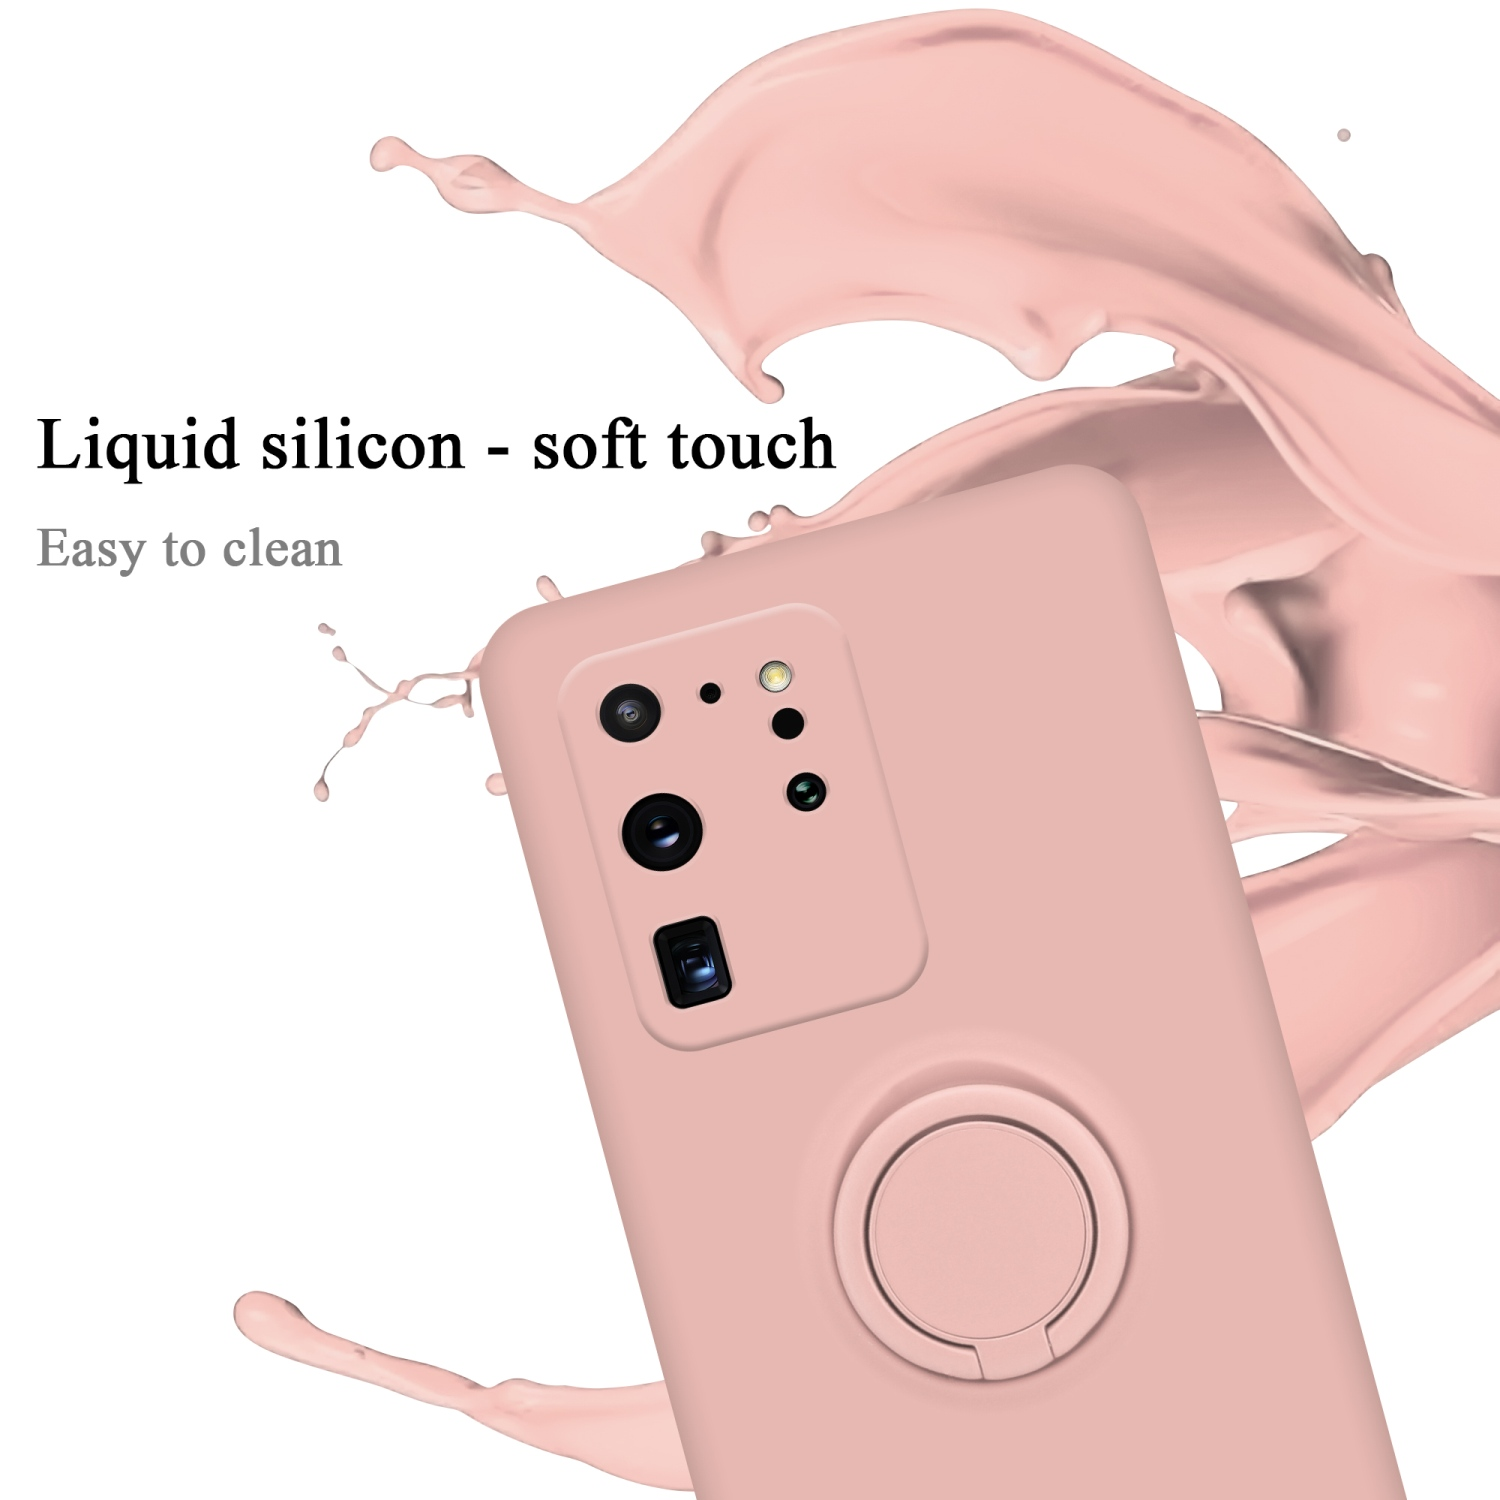 Samsung, Backcover, ULTRA, Silicone Style, Hülle PINK im Case LIQUID S20 Liquid Ring Galaxy CADORABO